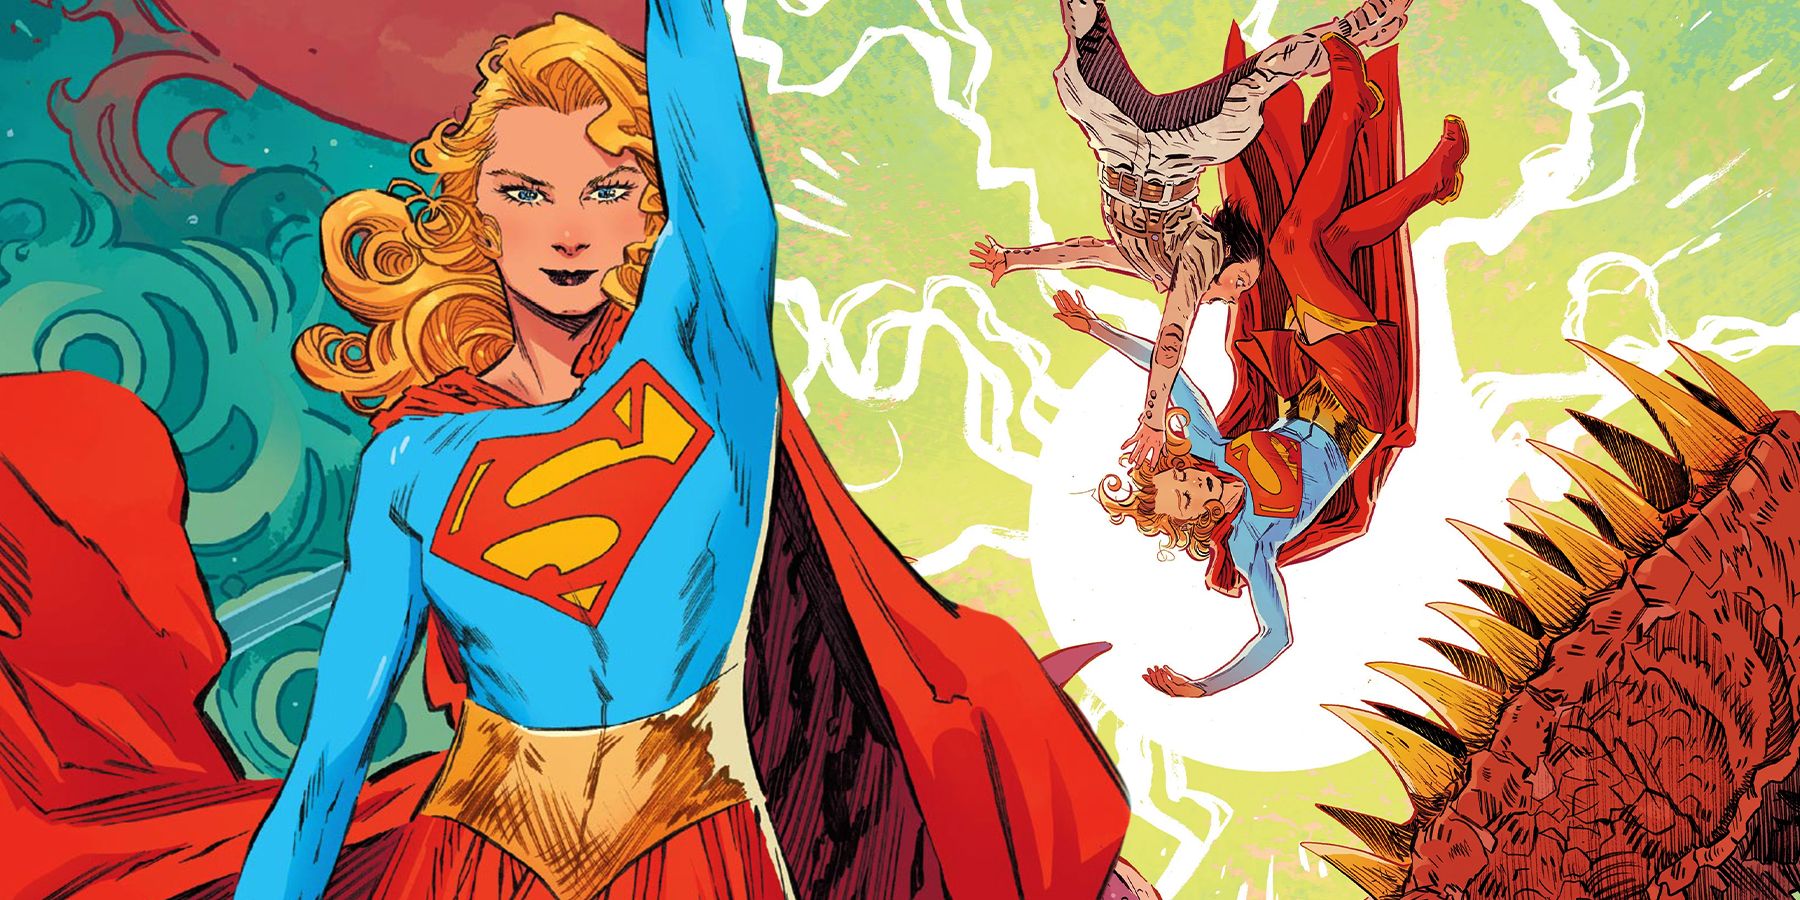 Why Supergirl: Woman of Tomorrow Is a Bad Fit for the DCU